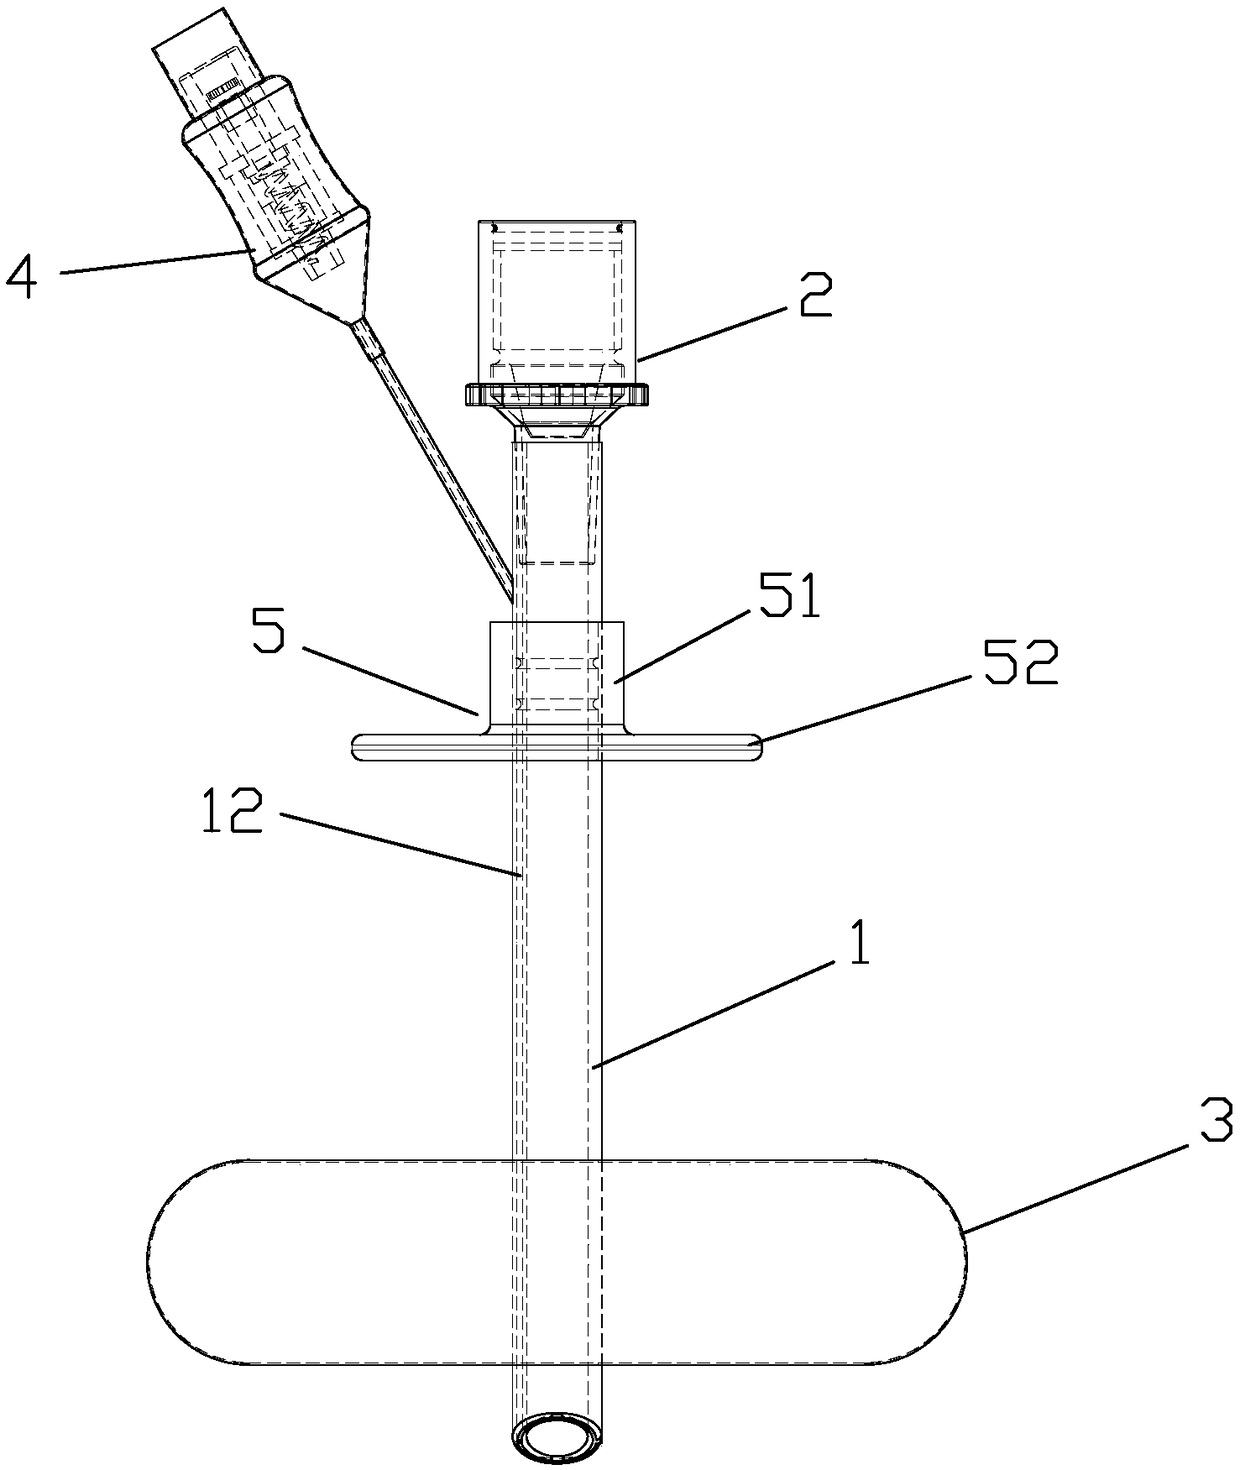 Device for replacement of stomach and intestine fistula